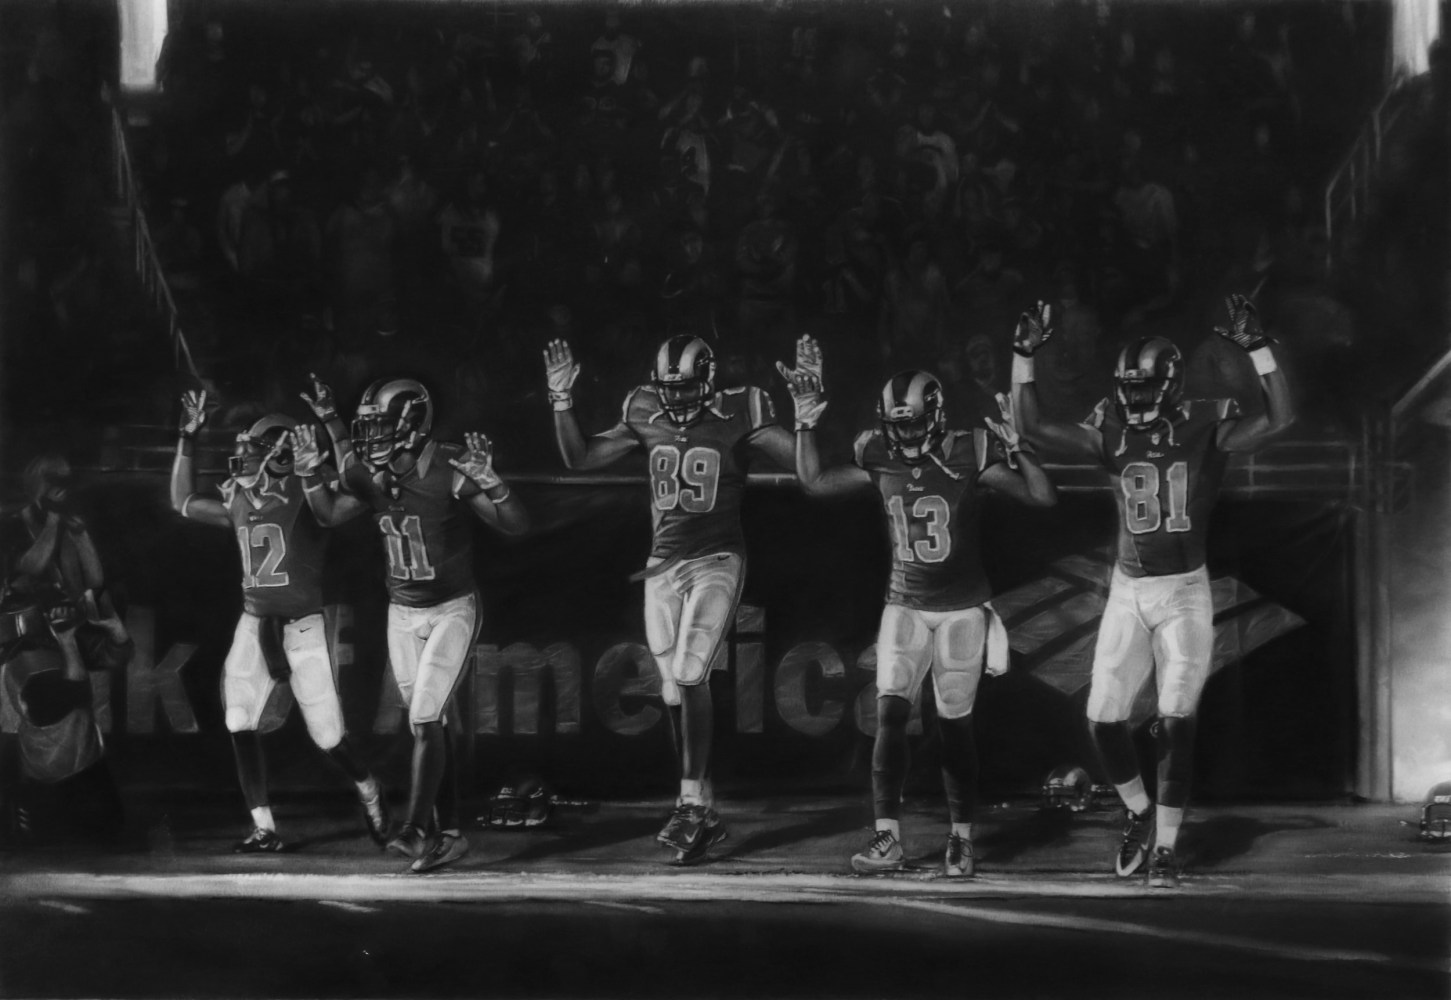 Robert Longo
Full-scale Study for Five Rams (Ferguson, Hands Up: November 30,2014), 2015
Charcoal on a Unique Digital Pigment Print in 3 parts
100 x 45 inches (left &amp;amp; right panels - image)
100 x 56 inches (center panel - image)
100 x 146 inches (overall - image)
100 x 150 inches (overall - paper)
Courtesy of the Artist and Metro Pictures, New York